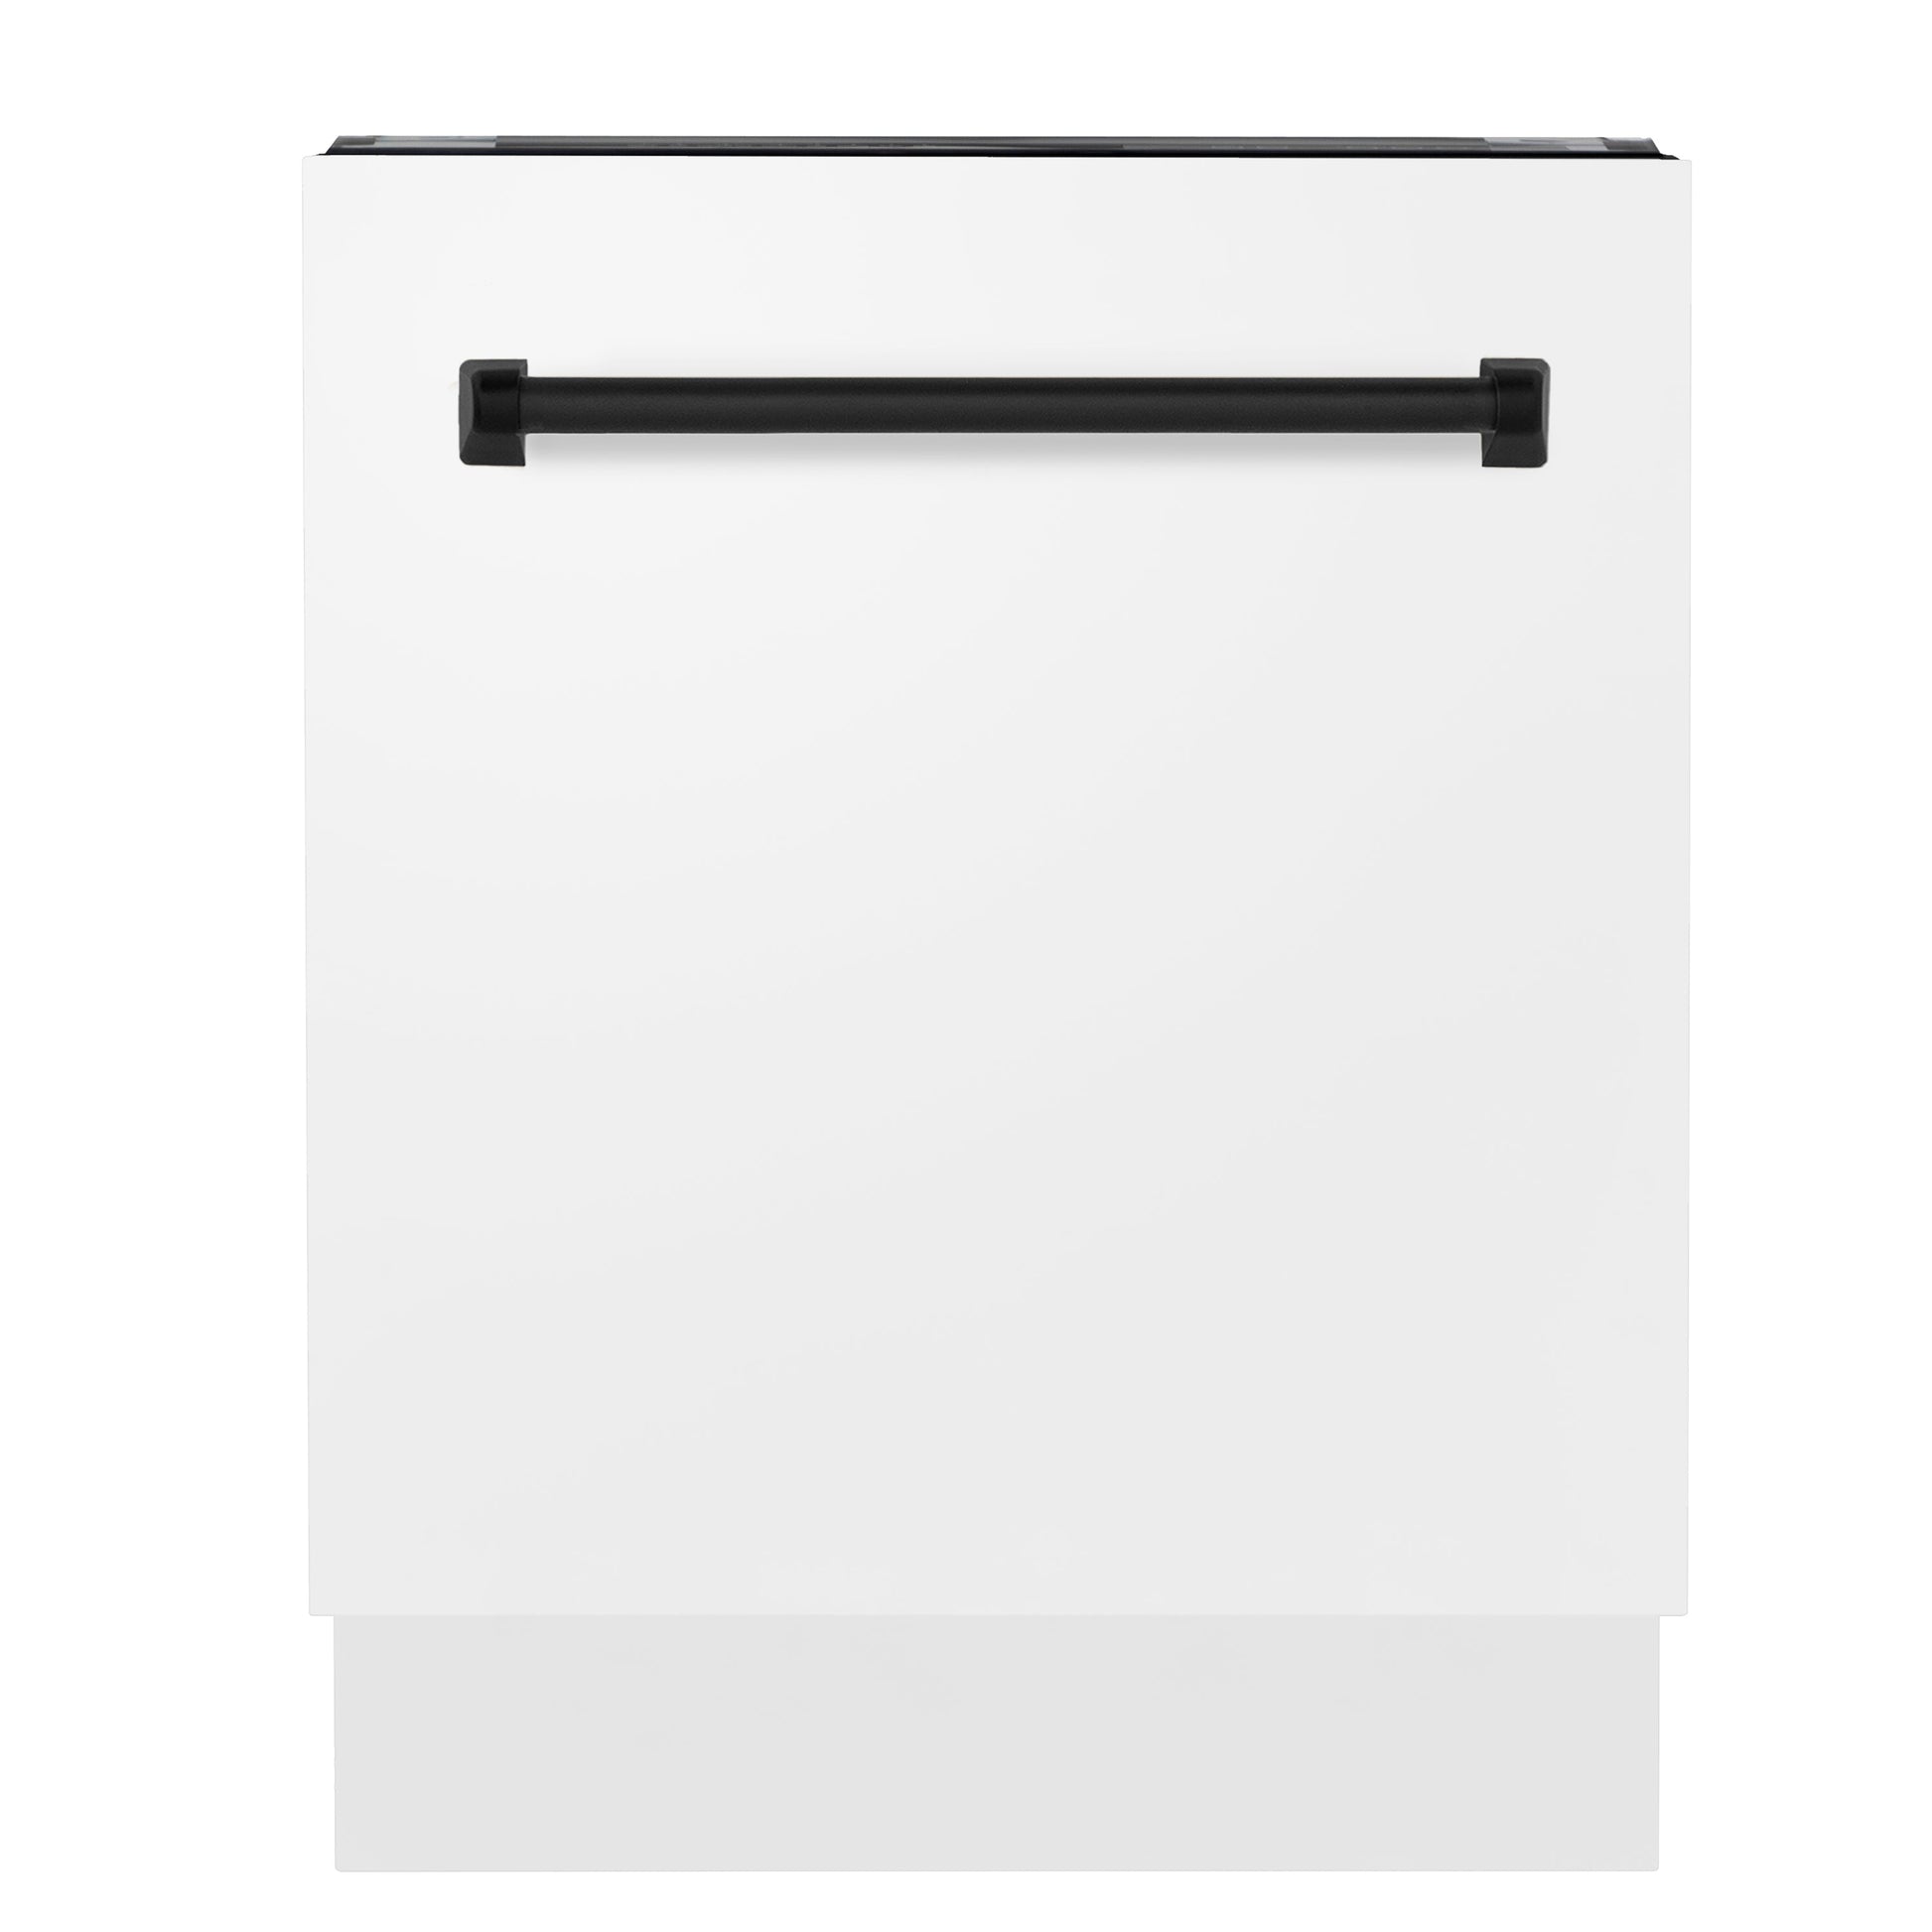 ZLINE Autograph Edition 24 in. 3rd Rack Top Control Tall Tub Dishwasher in White Matte with Matte Black Accent Handle, 51dBa (DWVZ-WM-24-MB) front.